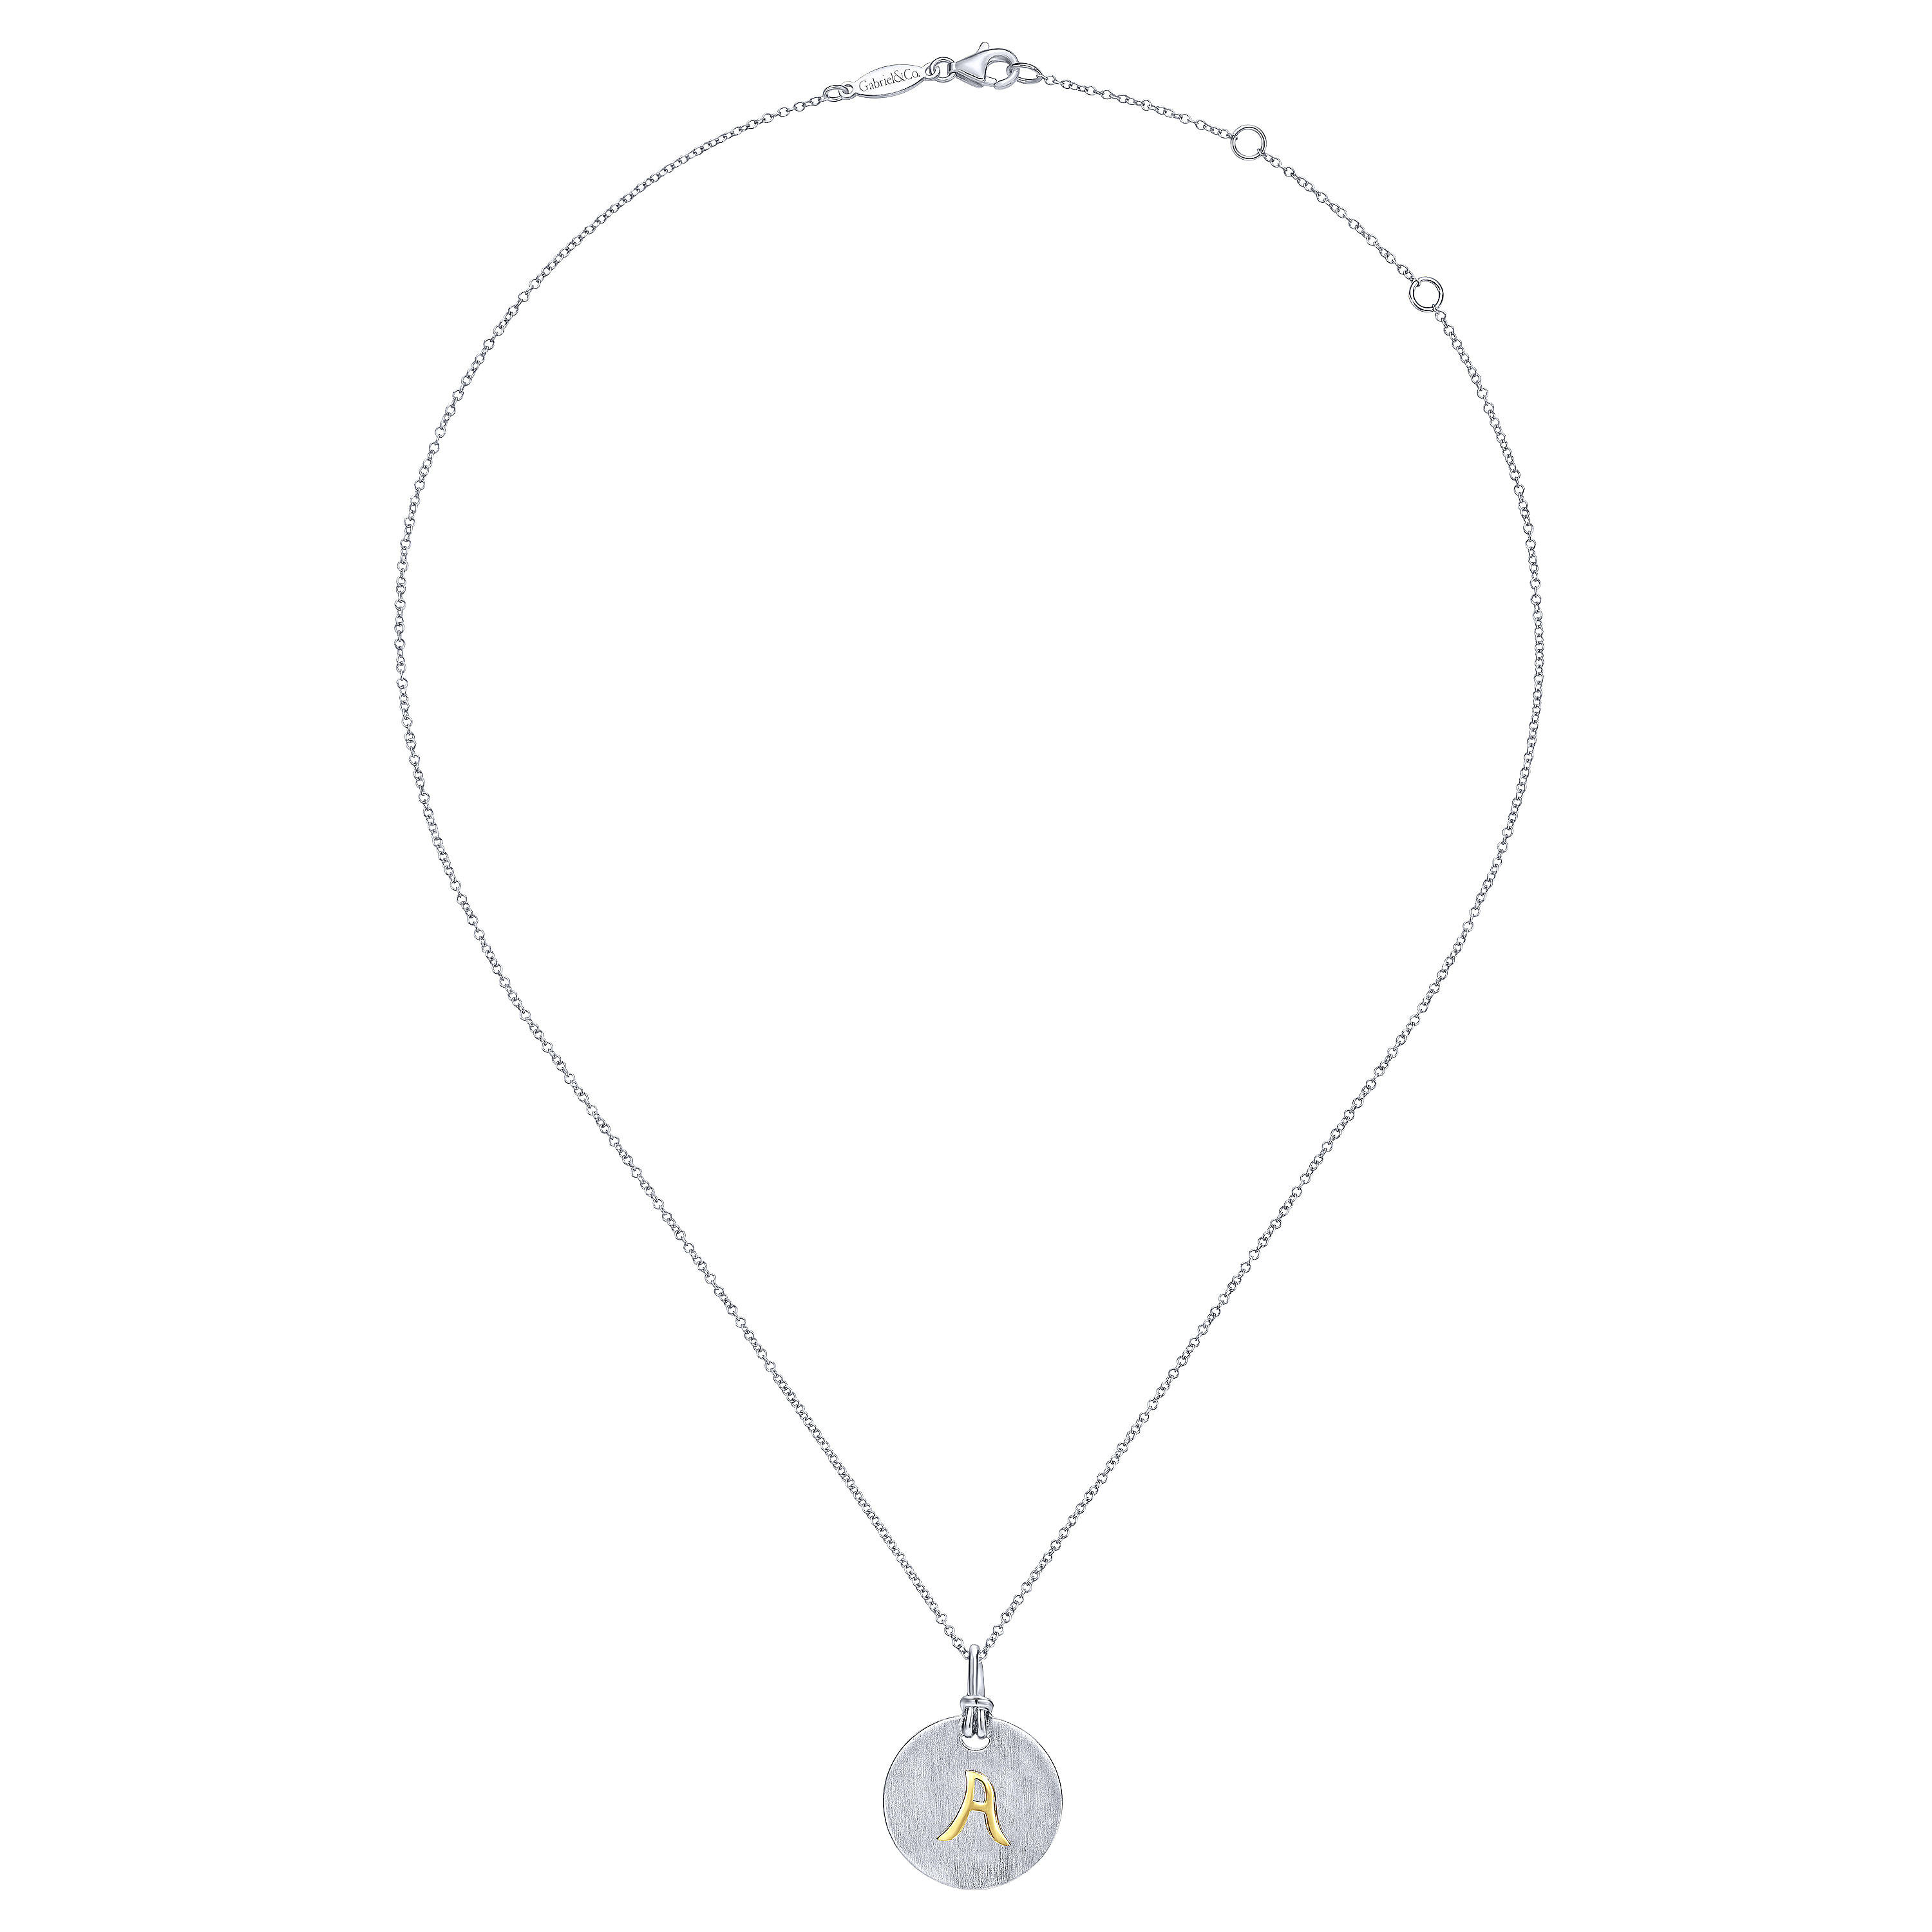 Silver 18K Yellow A Initial Round Disk Necklace